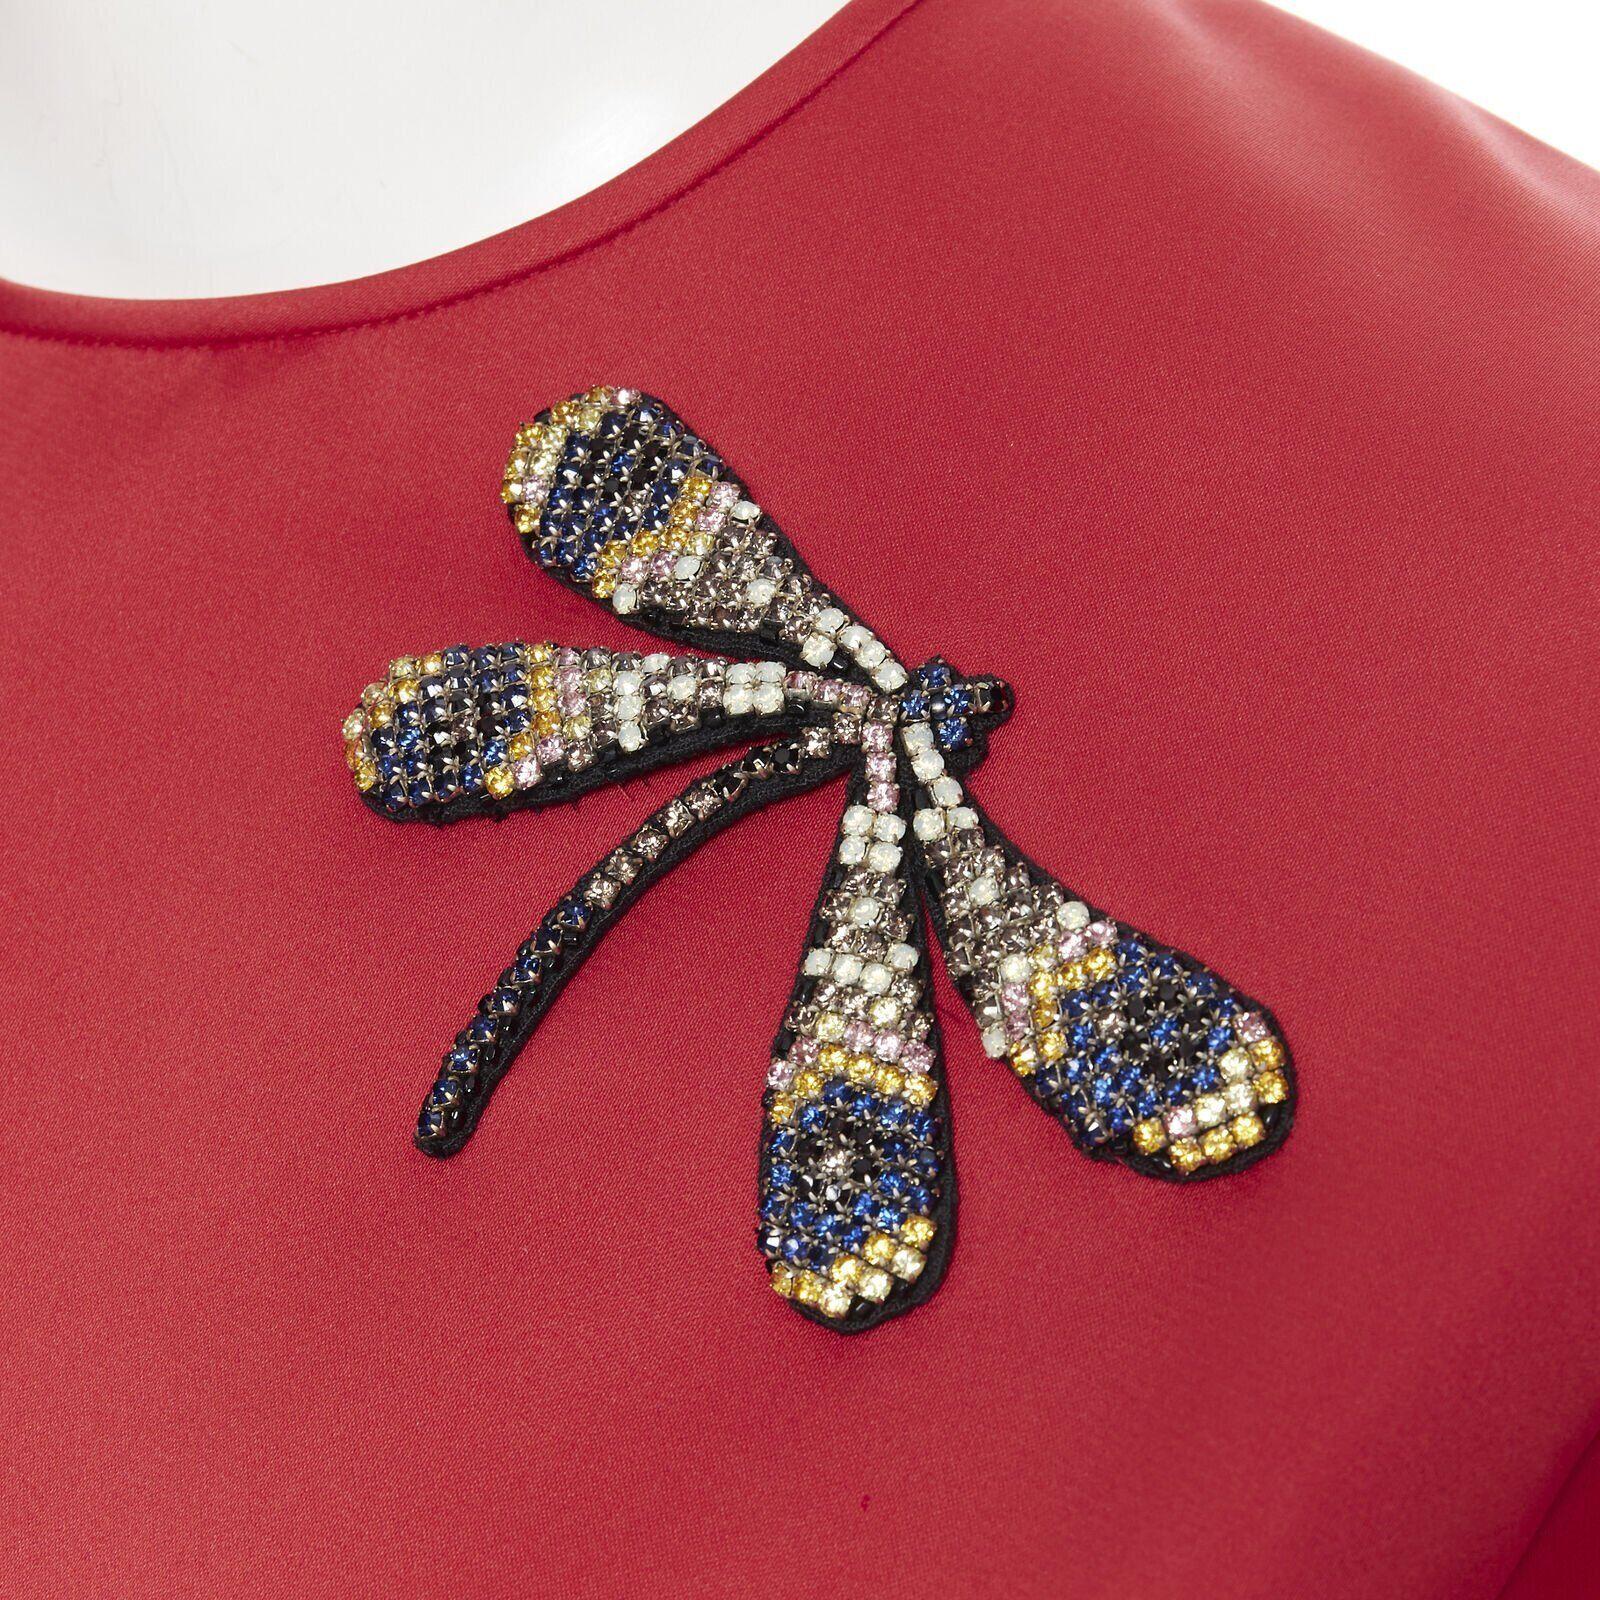 ROCHAS dragonfly crystal embellished red polyester short sleeve boxy top IT38 XS
Reference: LNKO/A01600
Brand: Rochas
Model: Boxy top
Material: Polyester
Color: Red
Pattern: Solid
Closure: Button
Extra Details: Crystal dragonfly embroidery design.